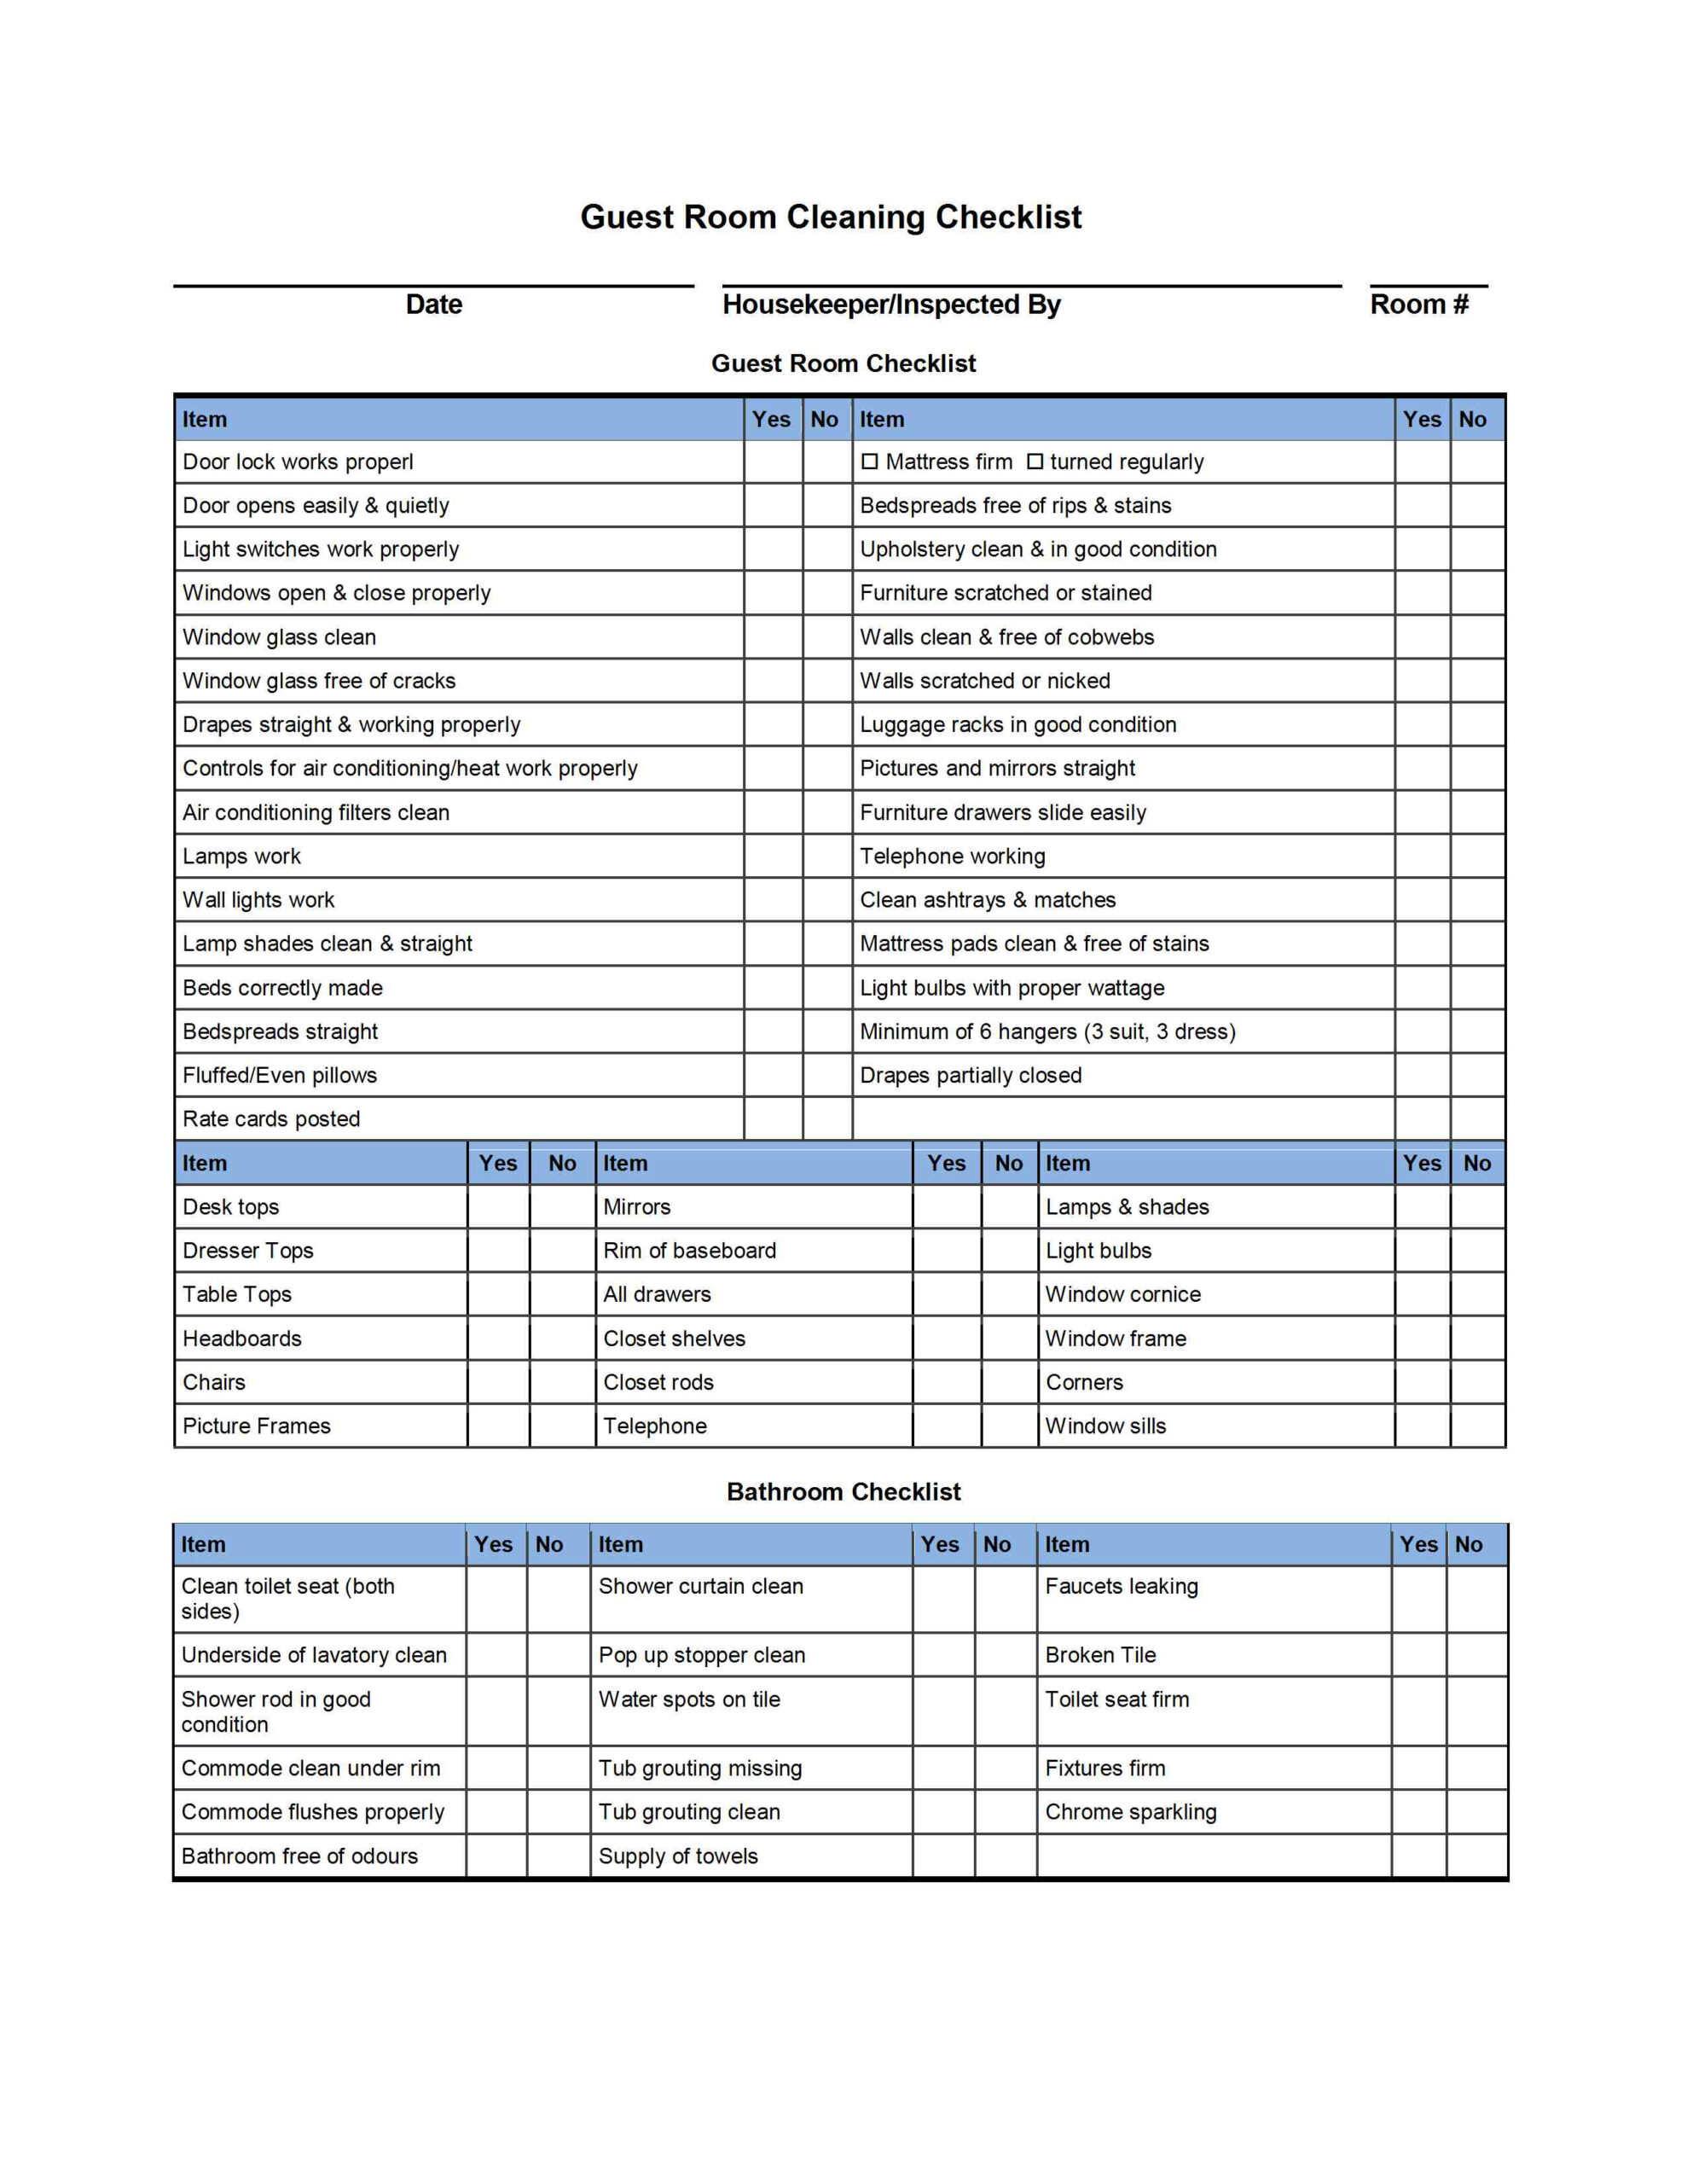 Guest Room Cleaning Checklist Template Regarding College Application Checklist Template In College Application Checklist Template